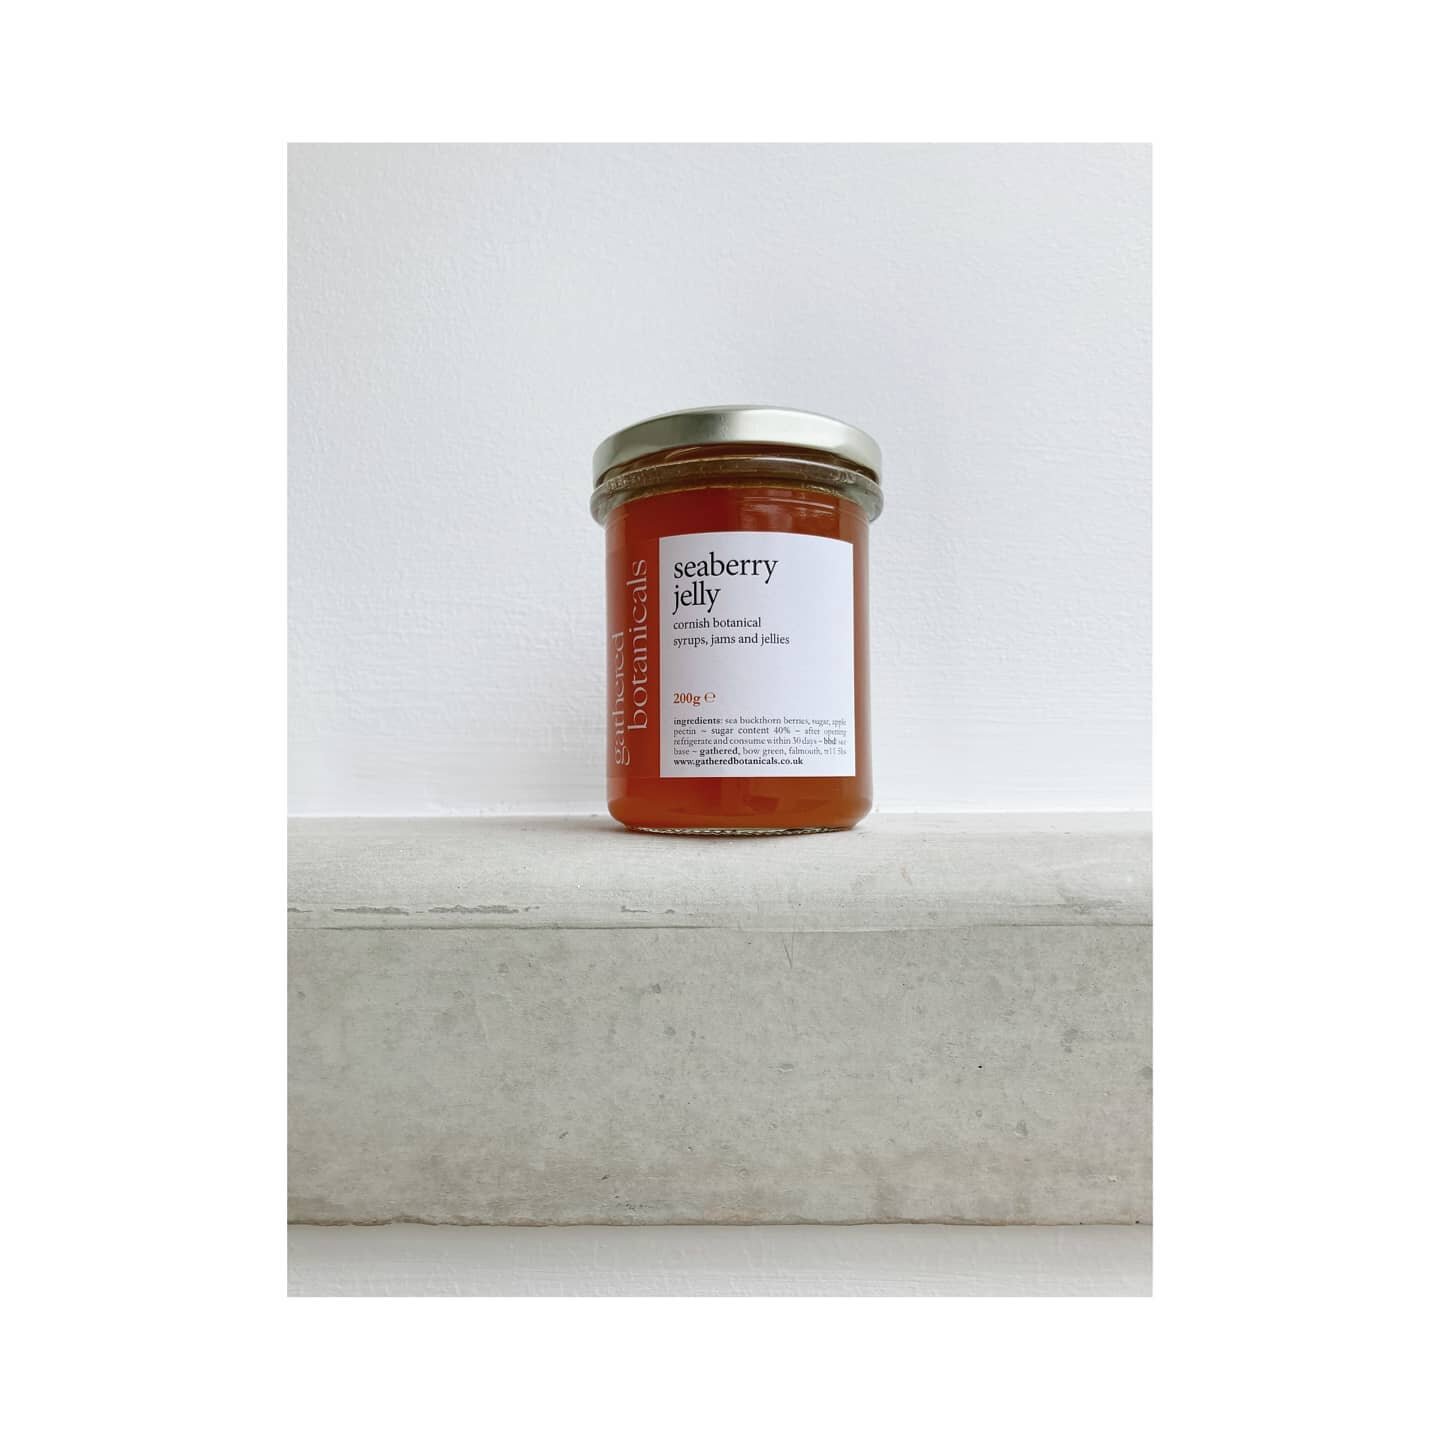 NEW JELLY ALERT! 
our #seaberry jelly is made from cornish sea buckthorn berries grown by seth at @cornishseaberry ~ deliciously sharp with hints of tropical fruits and pineapple. we've been enjoying it for breakfast ~ pilled onto a toasted english m